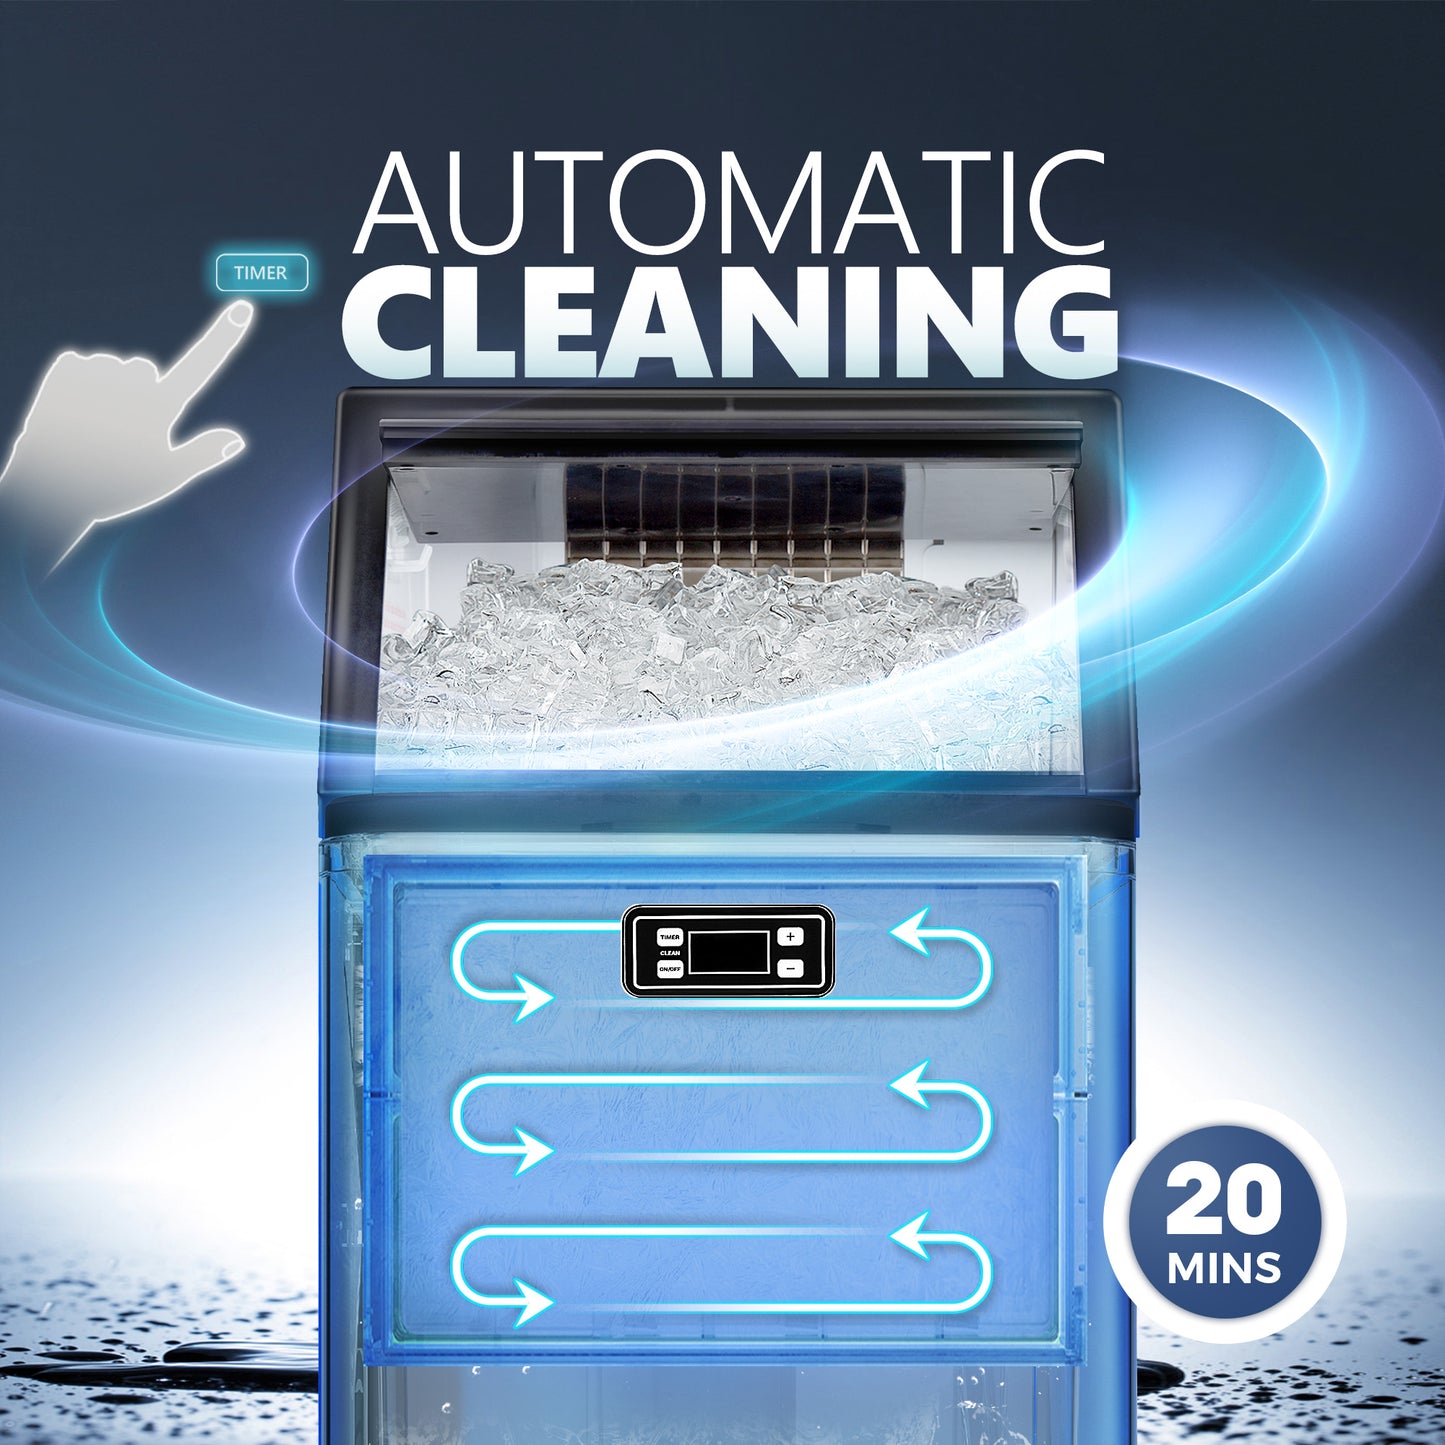 Simzlife 26lbs/24H Bullet Ice Countertop Ice Maker, 9 Bullet Ice Cubes